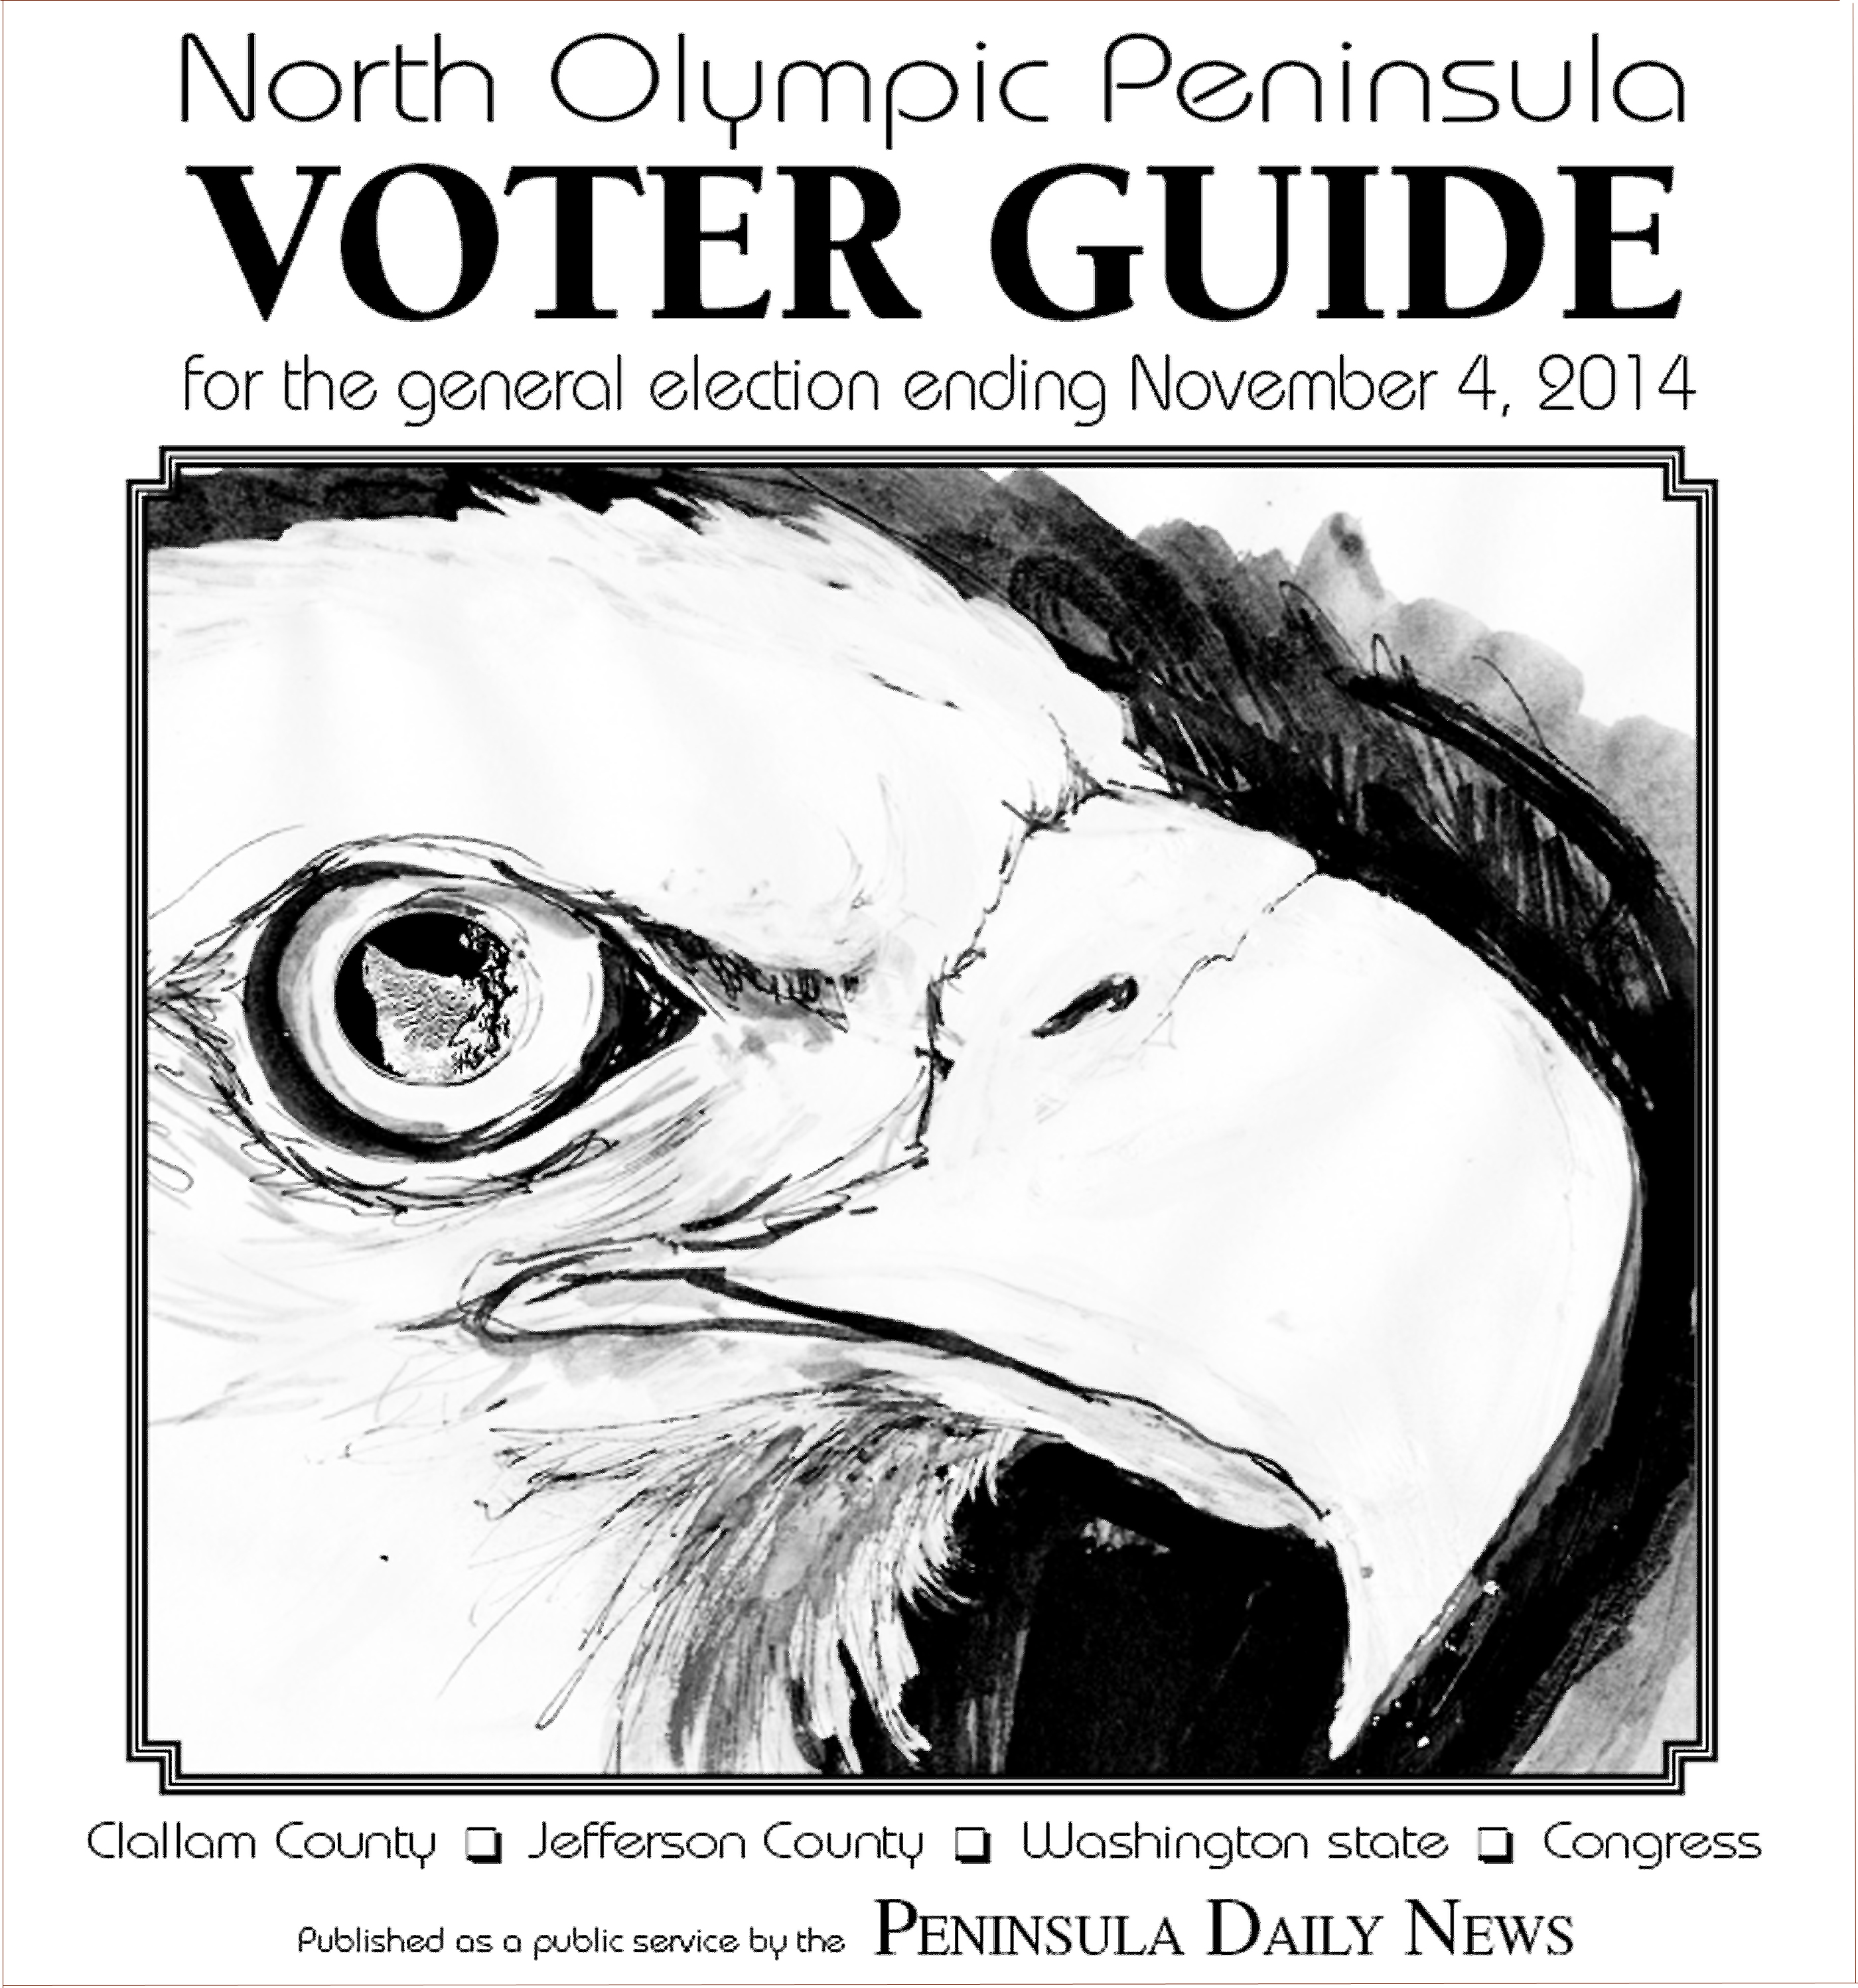 YOUR BALLOT COMPANION: North Olympic Peninsula Voter Guide online